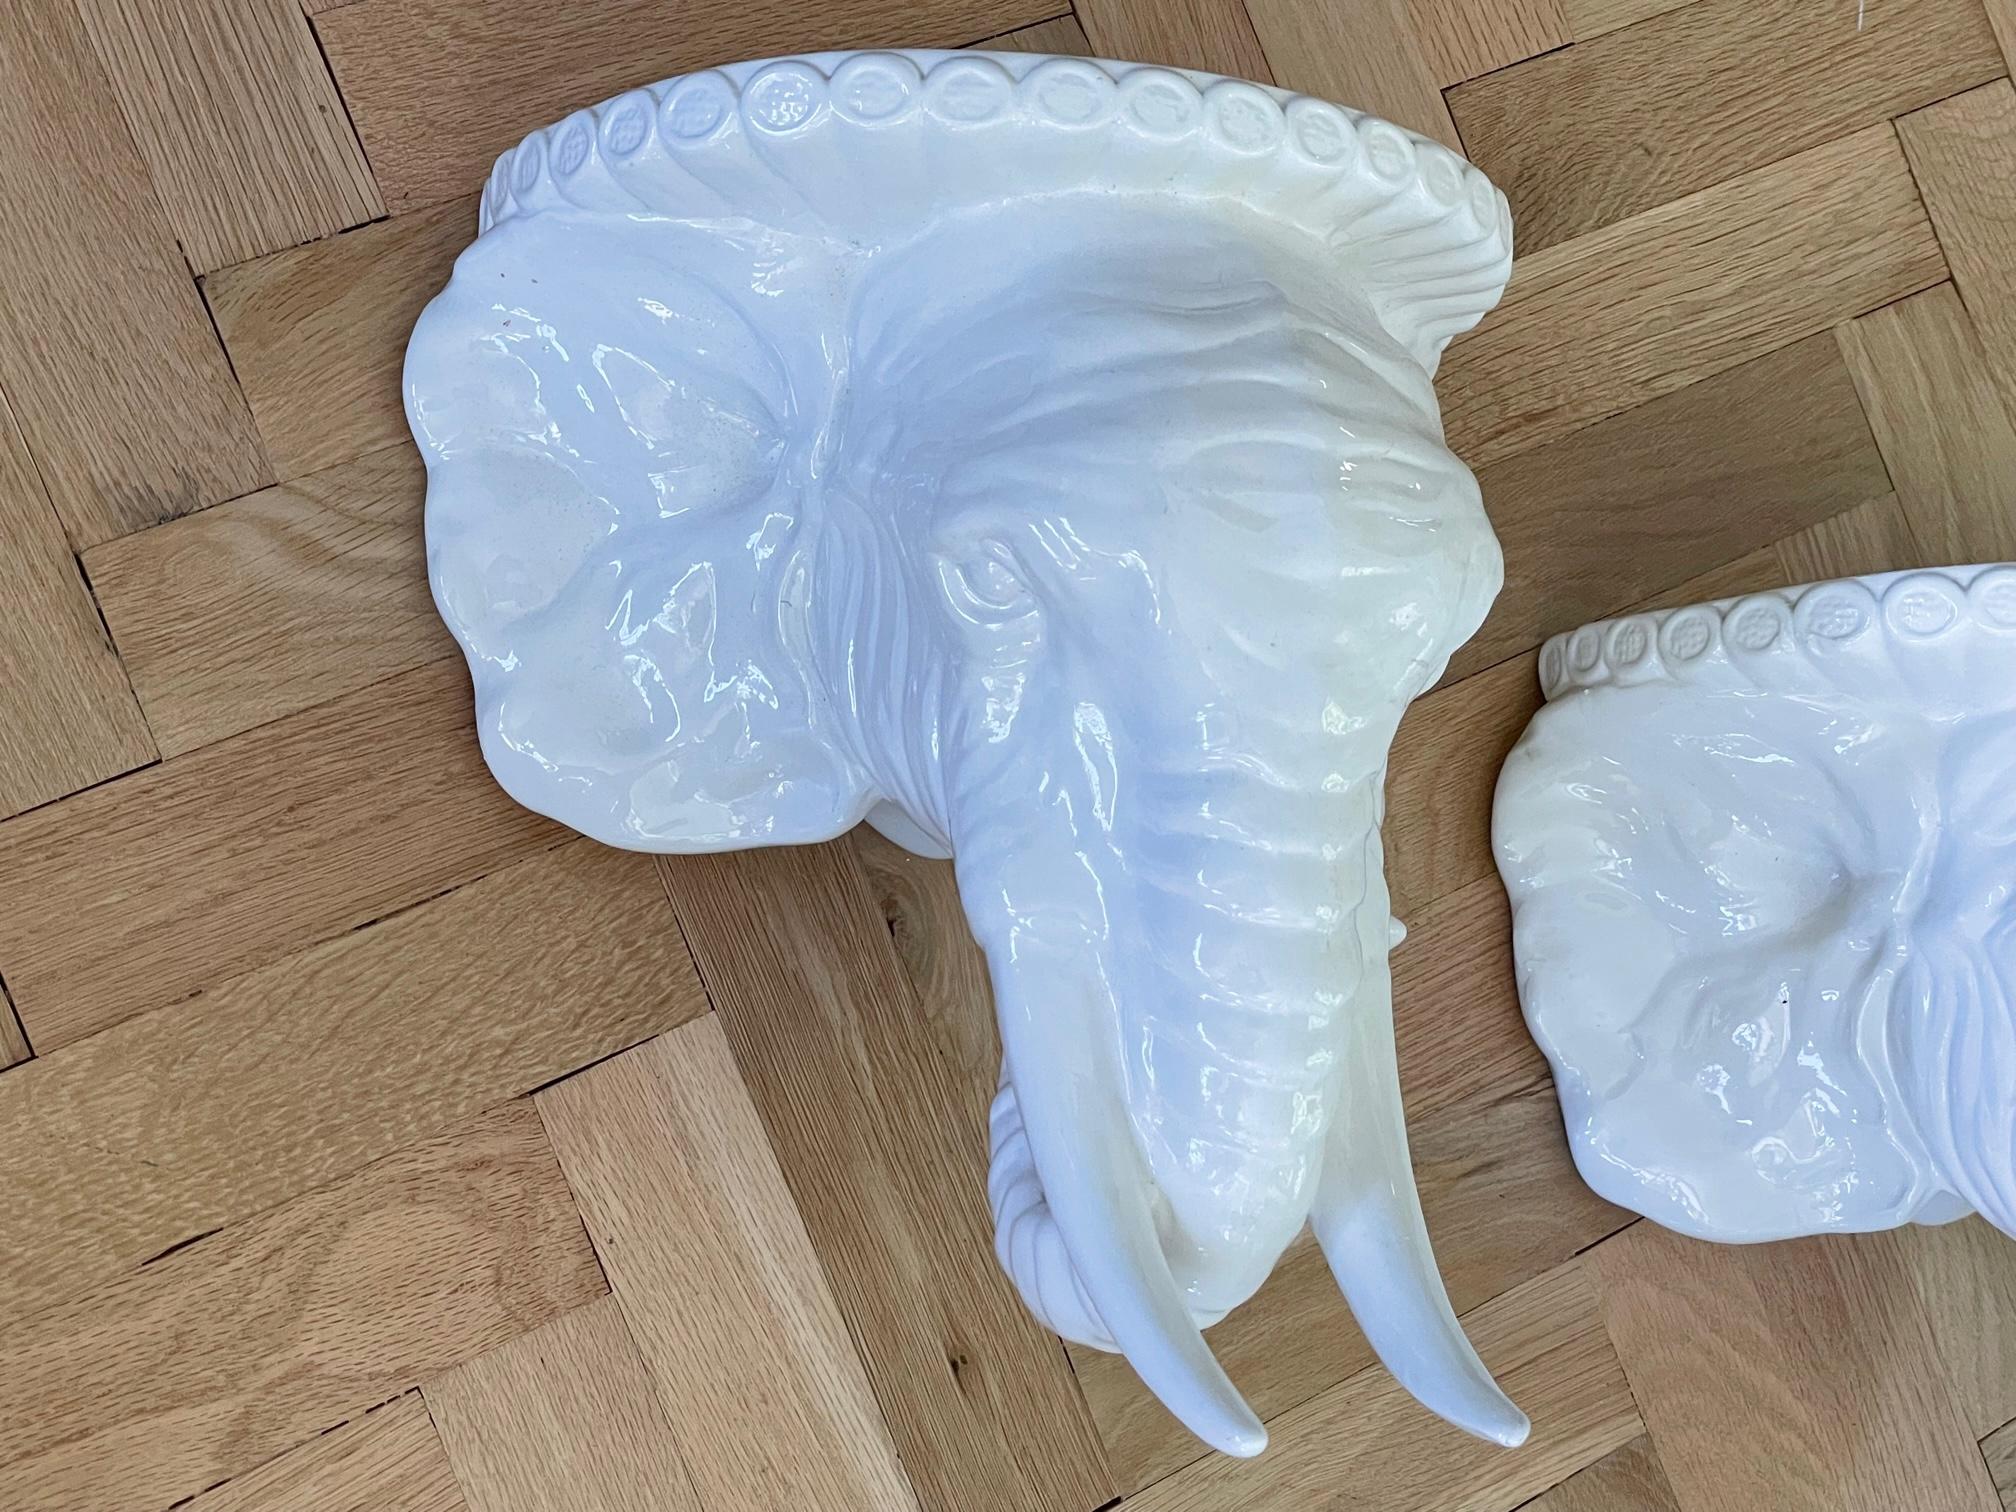 Pair of sculptural elephant wall shelves made in Italy. Heavy glaze and bright white finish. Good condition, no chips or cracks.
For a shipping quote to your exact zip code, please message us.
